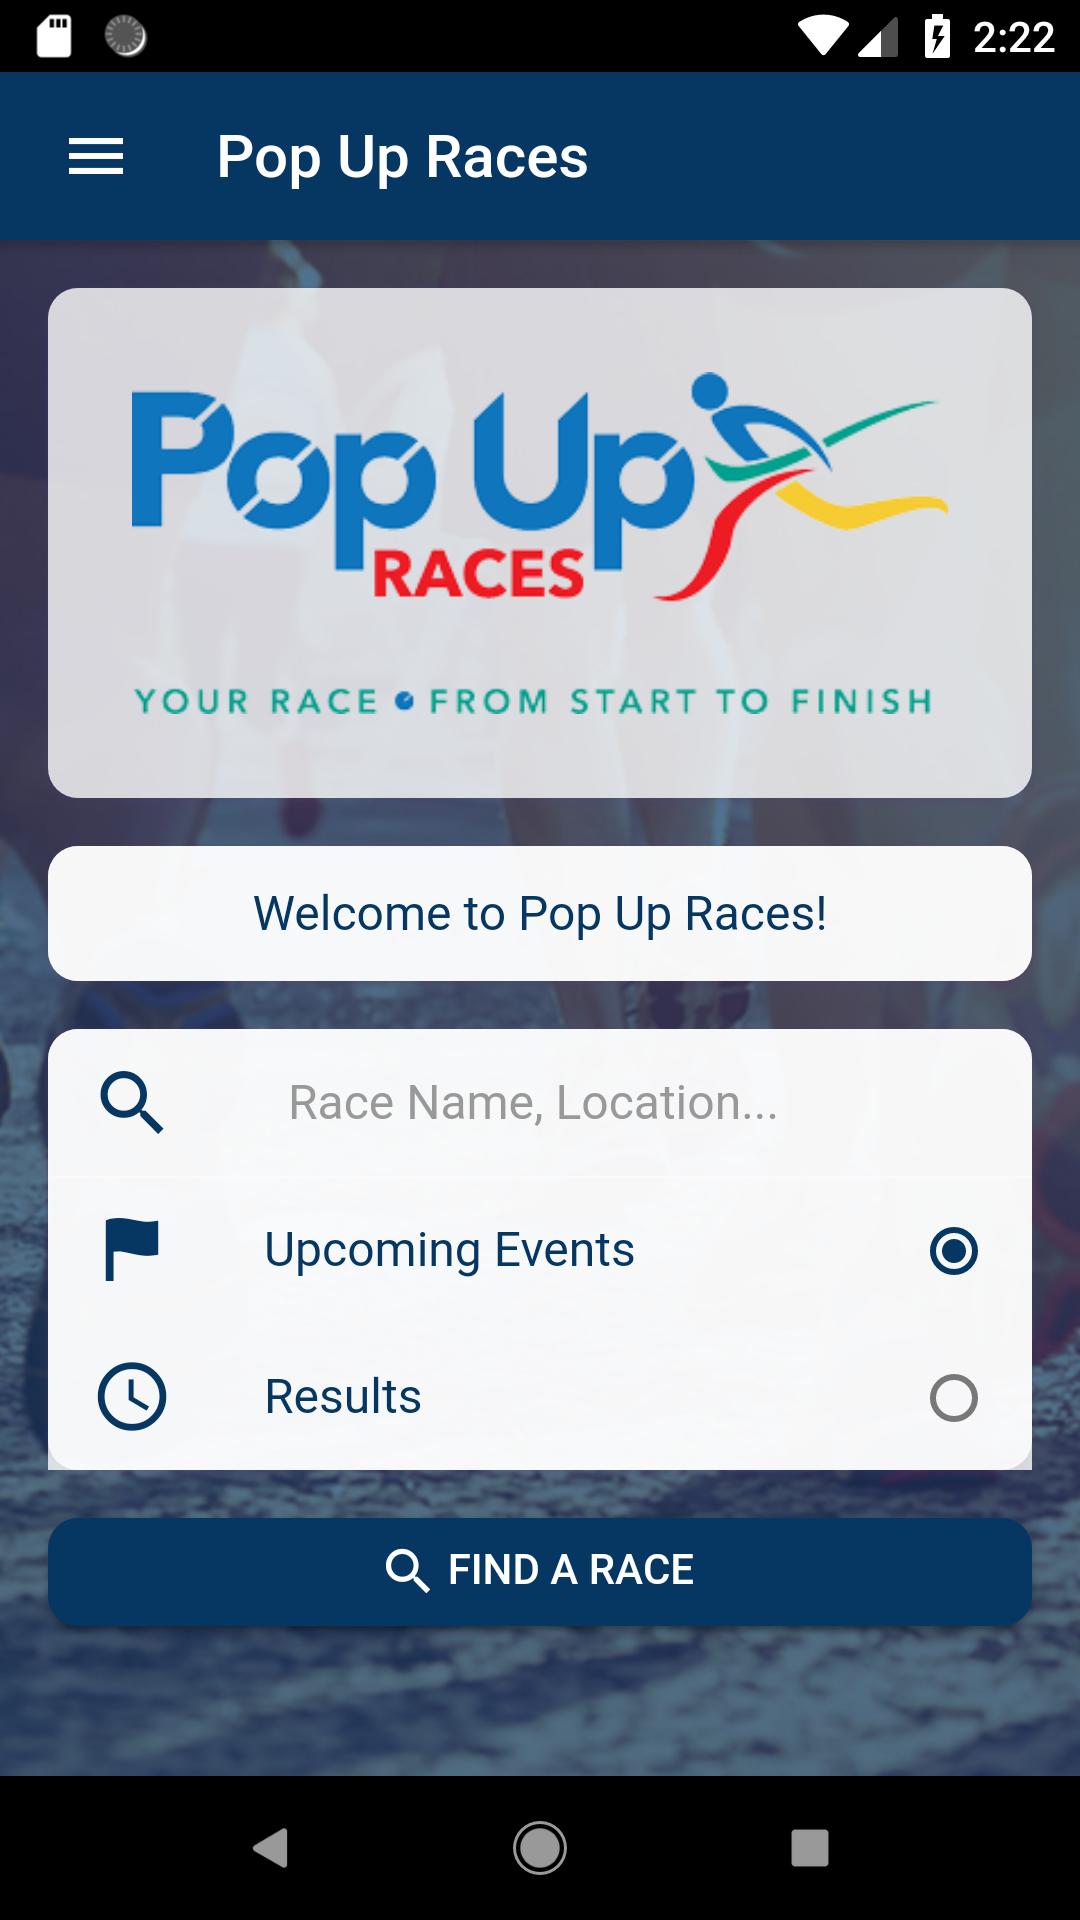 Pop Up Races for Android - APK Download